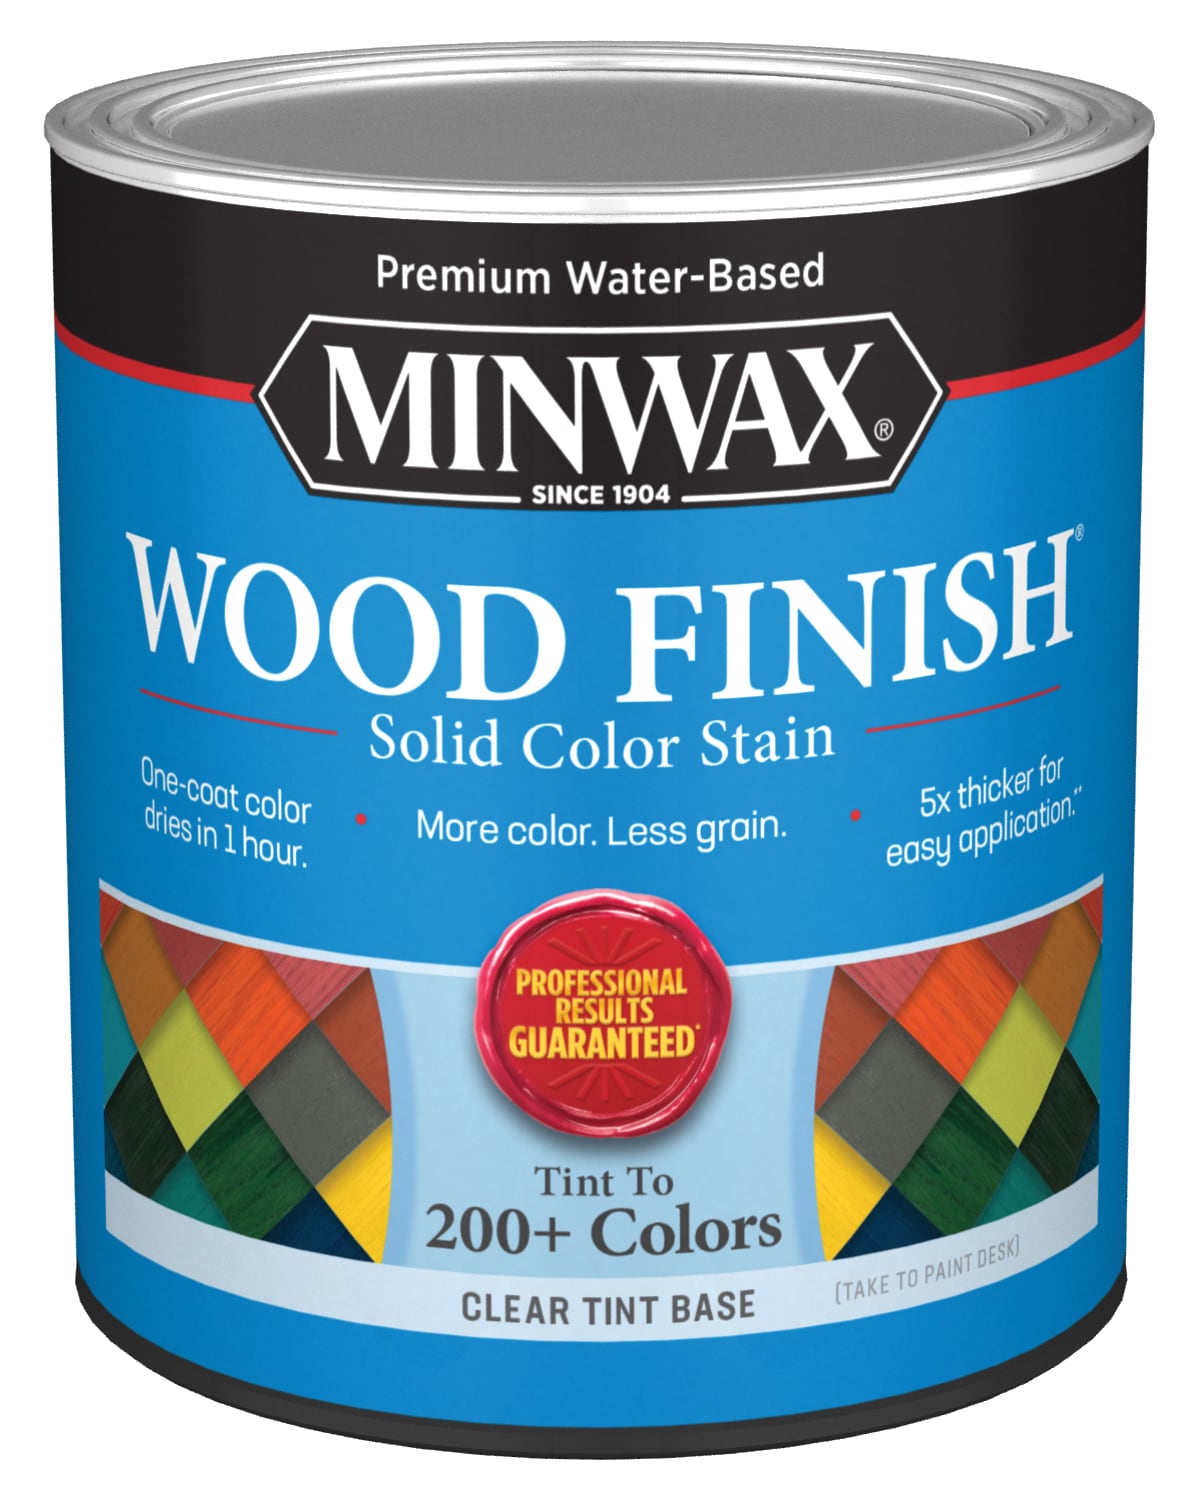 Colorful Wood Stains for Craft Projects, Water-based Wood Stains for  Furniture Refinish, Paint Supplies for DIY Art, 39 Colorful Stains 